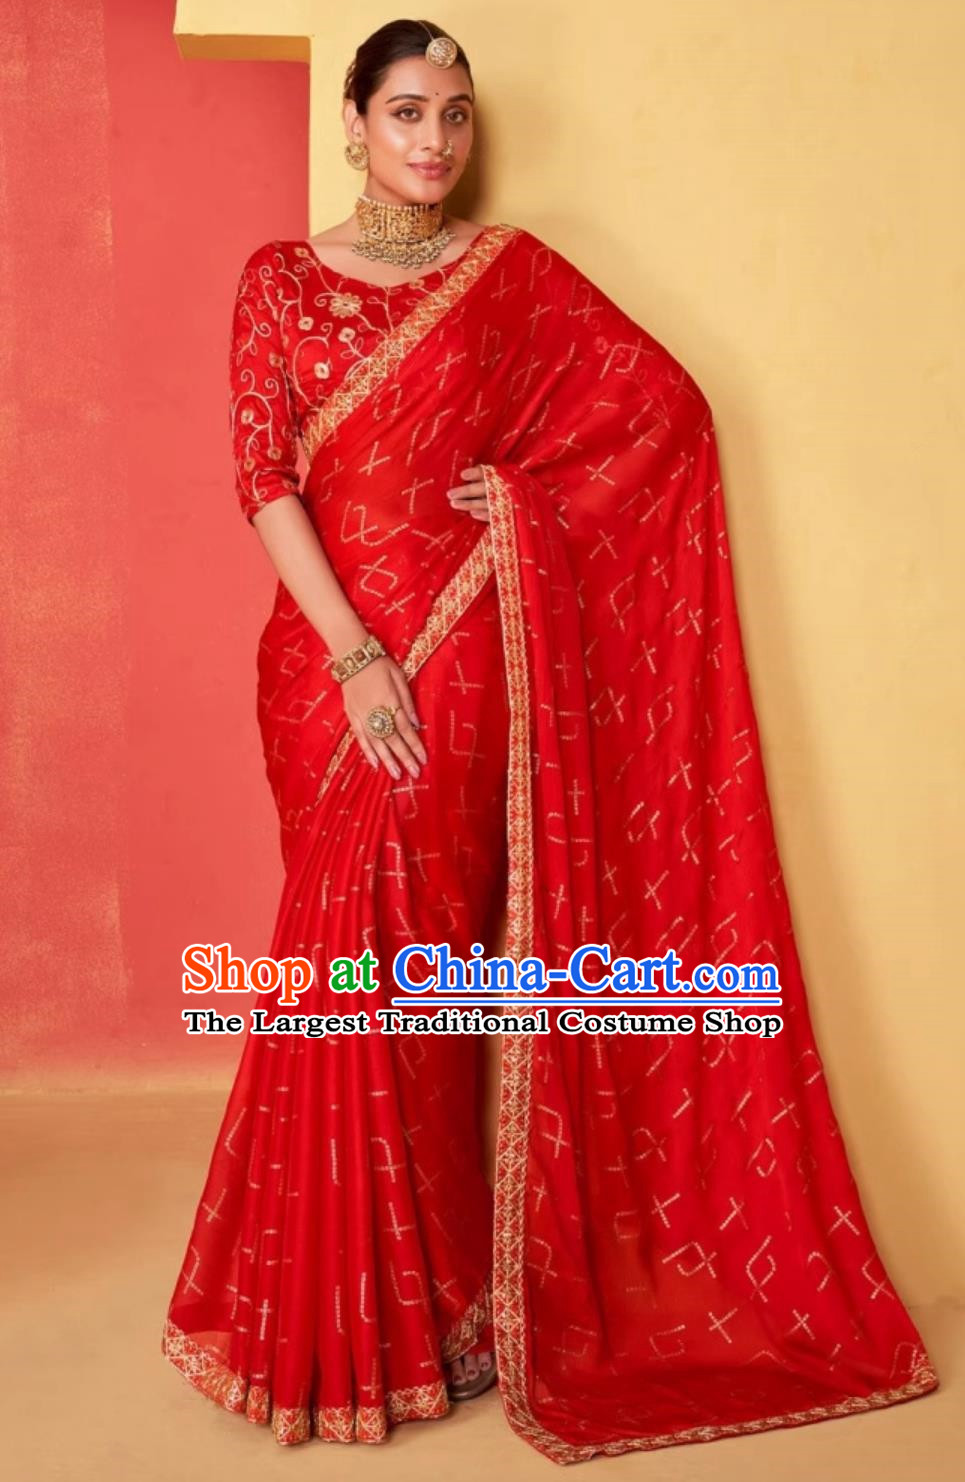 Indian Woman Embroidered Sari India Festival Clothing National Costume Traditional Wedding Red Dress